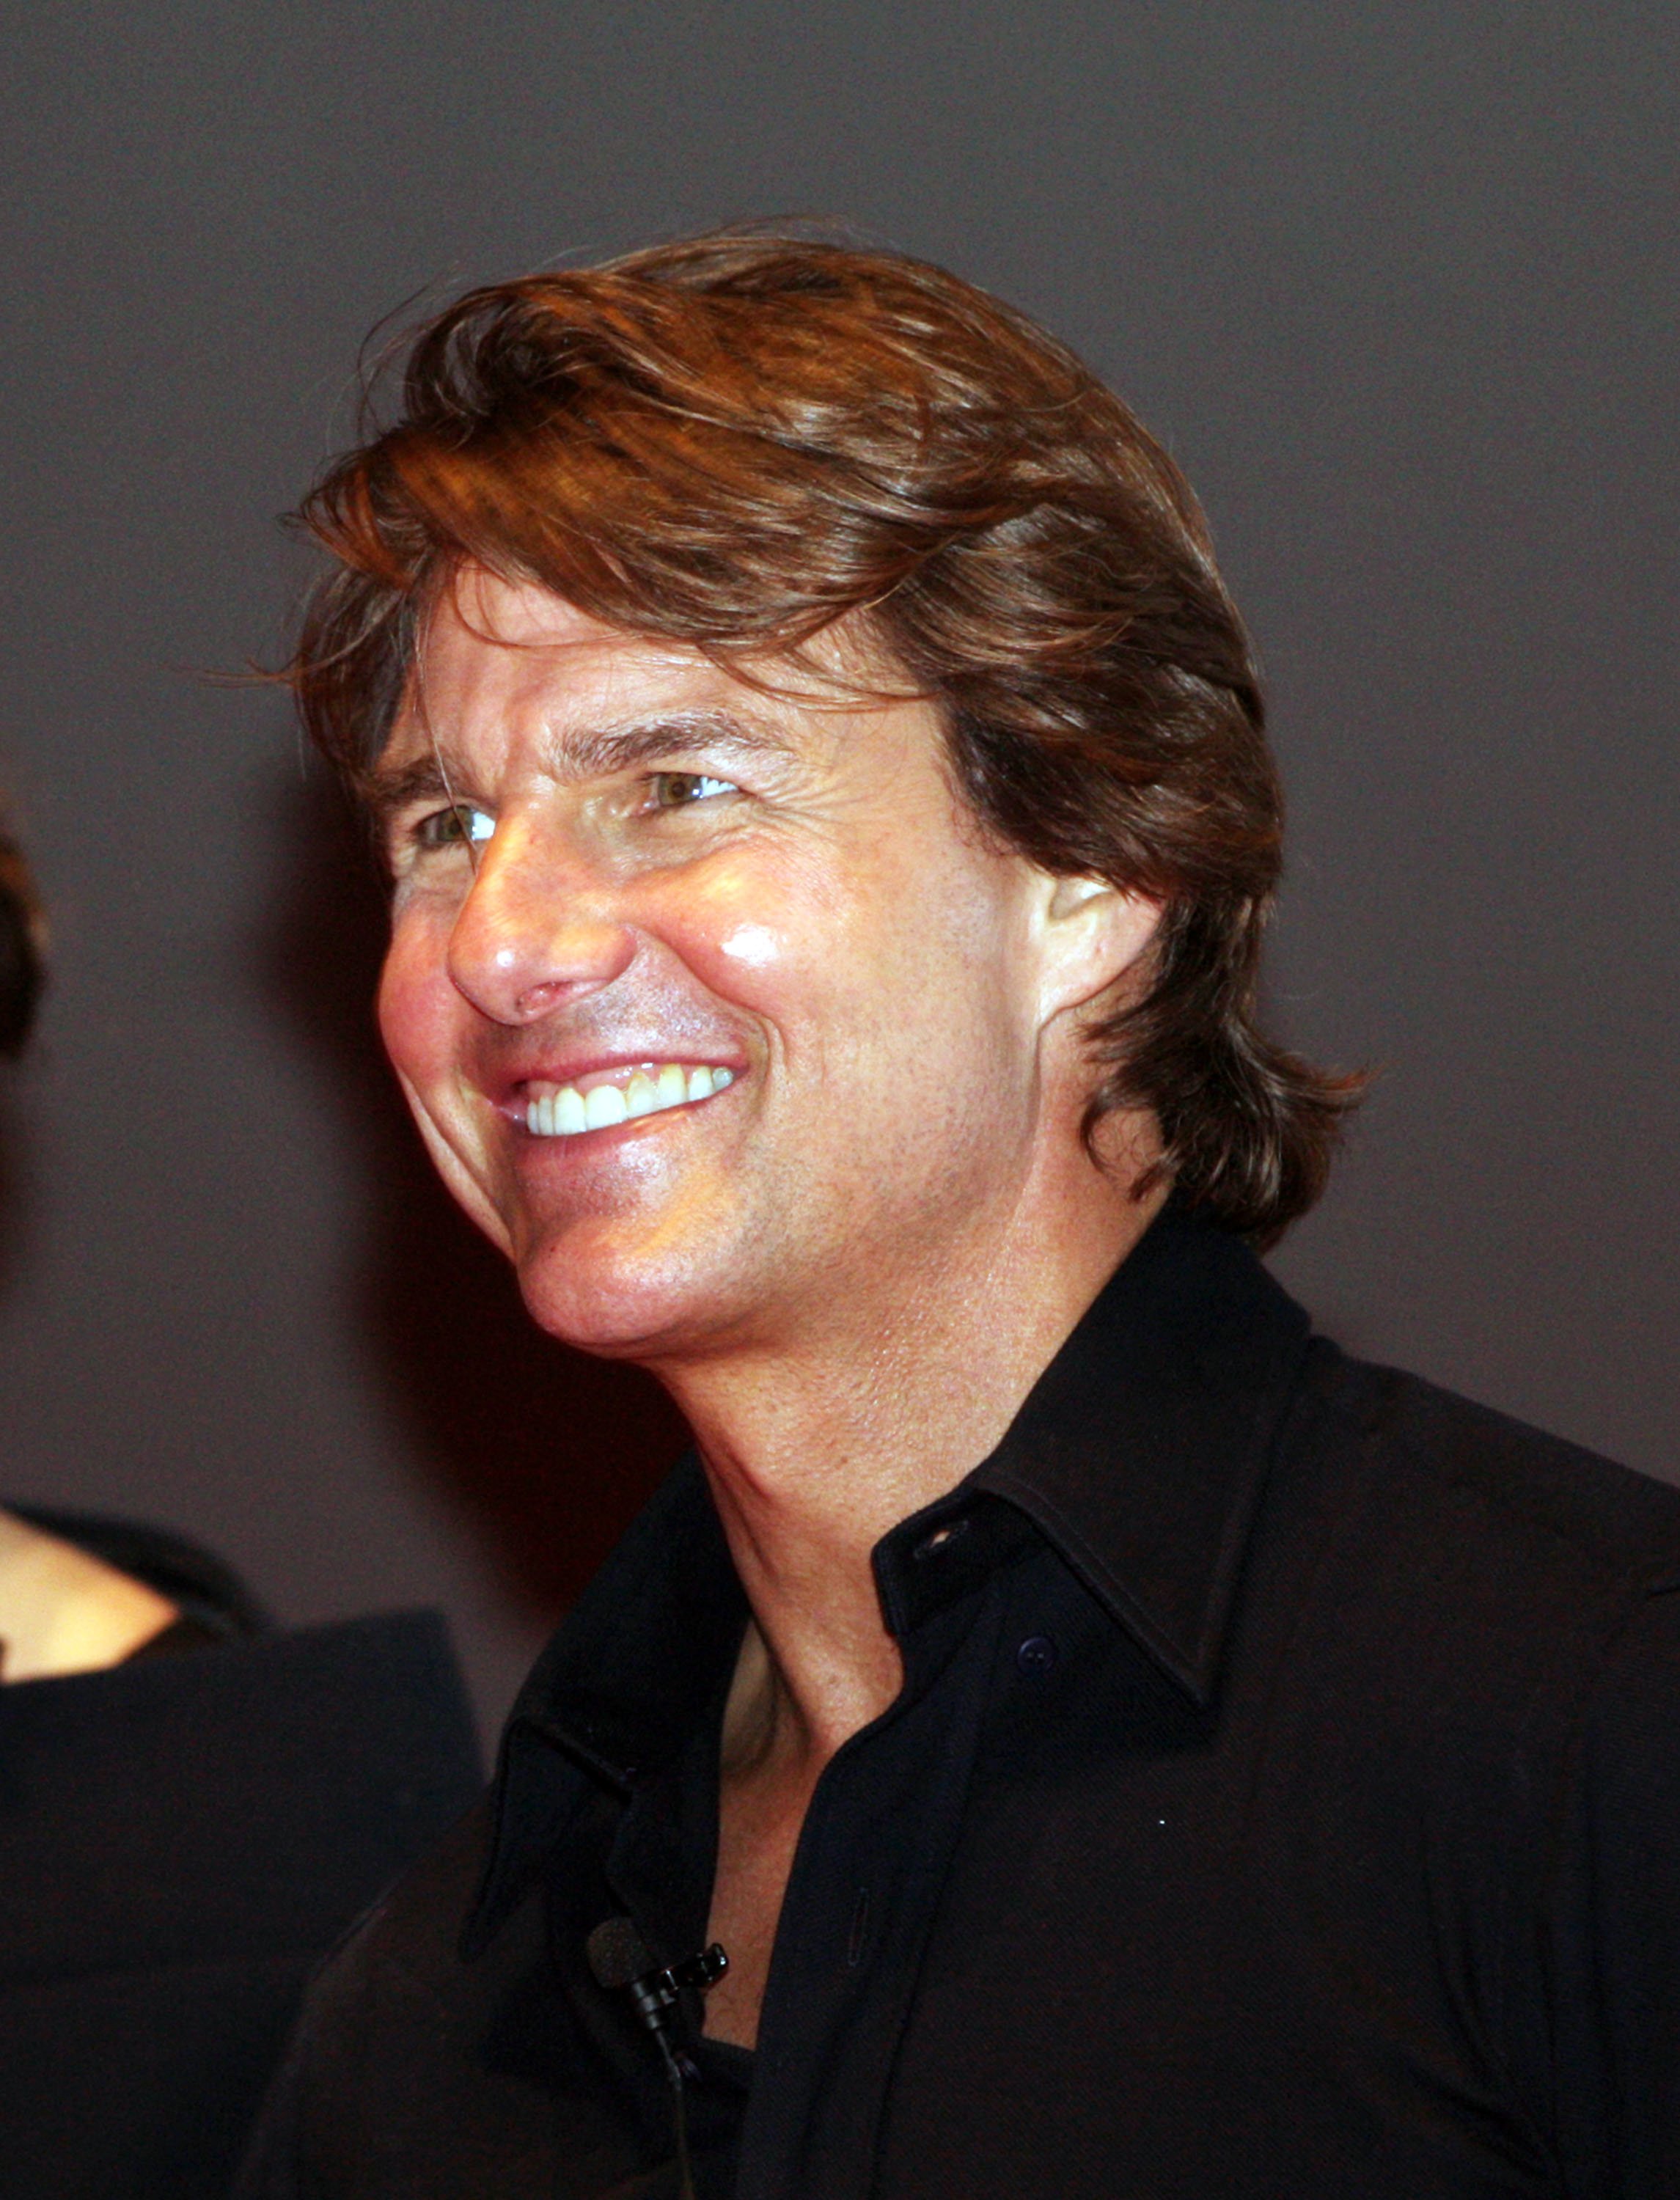 mission-impossible-rogue-nation-shanghai-premiere-sept7-2015-124.jpg